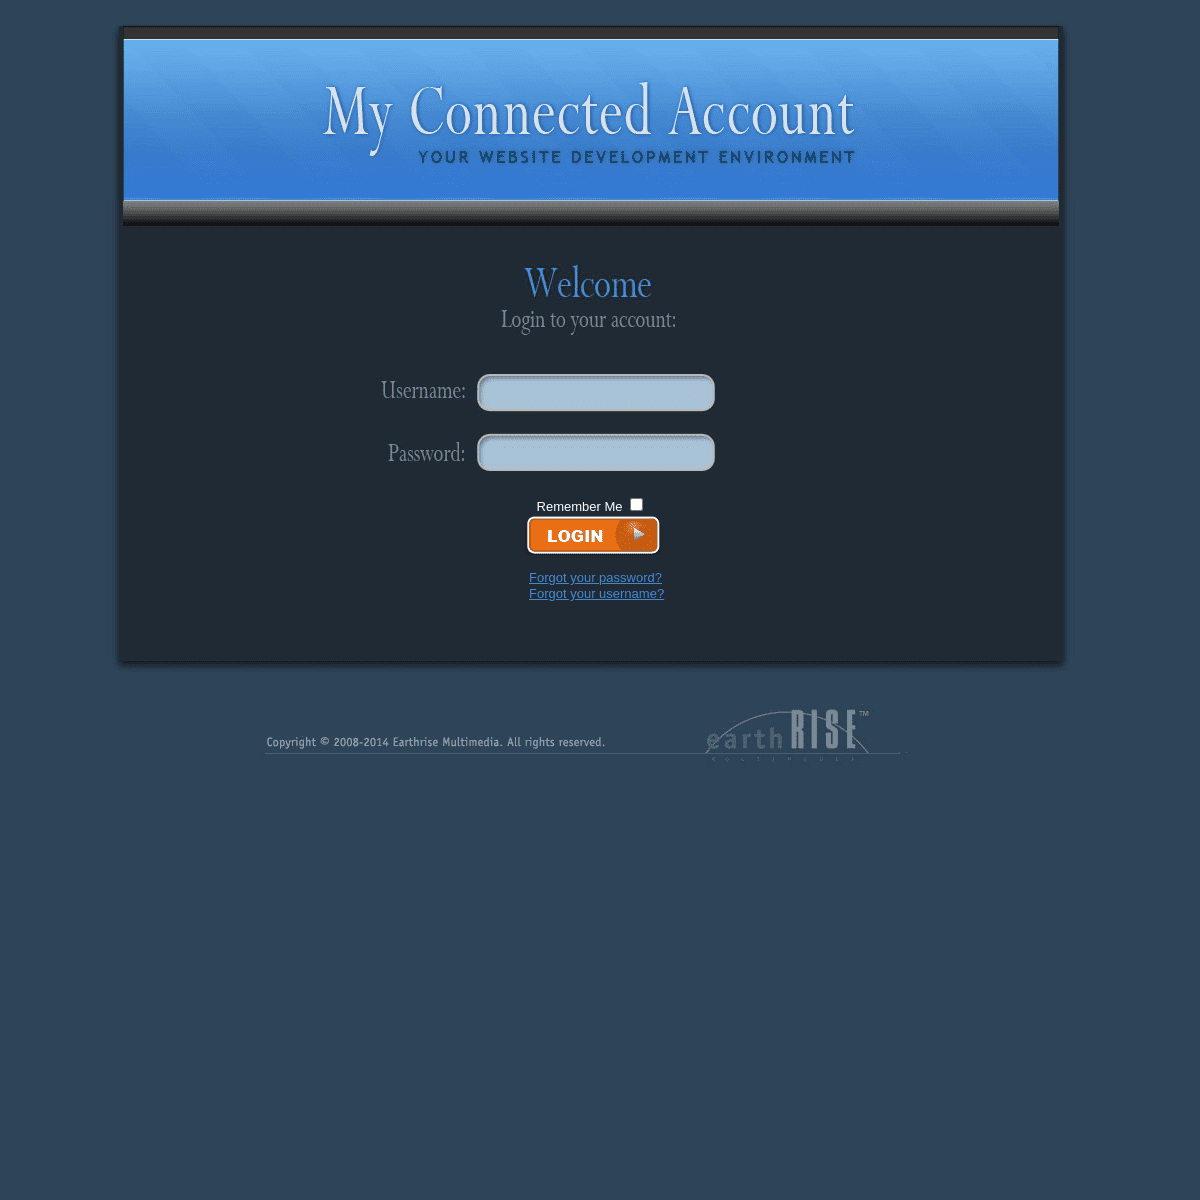 A complete backup of myconnectedaccount.com